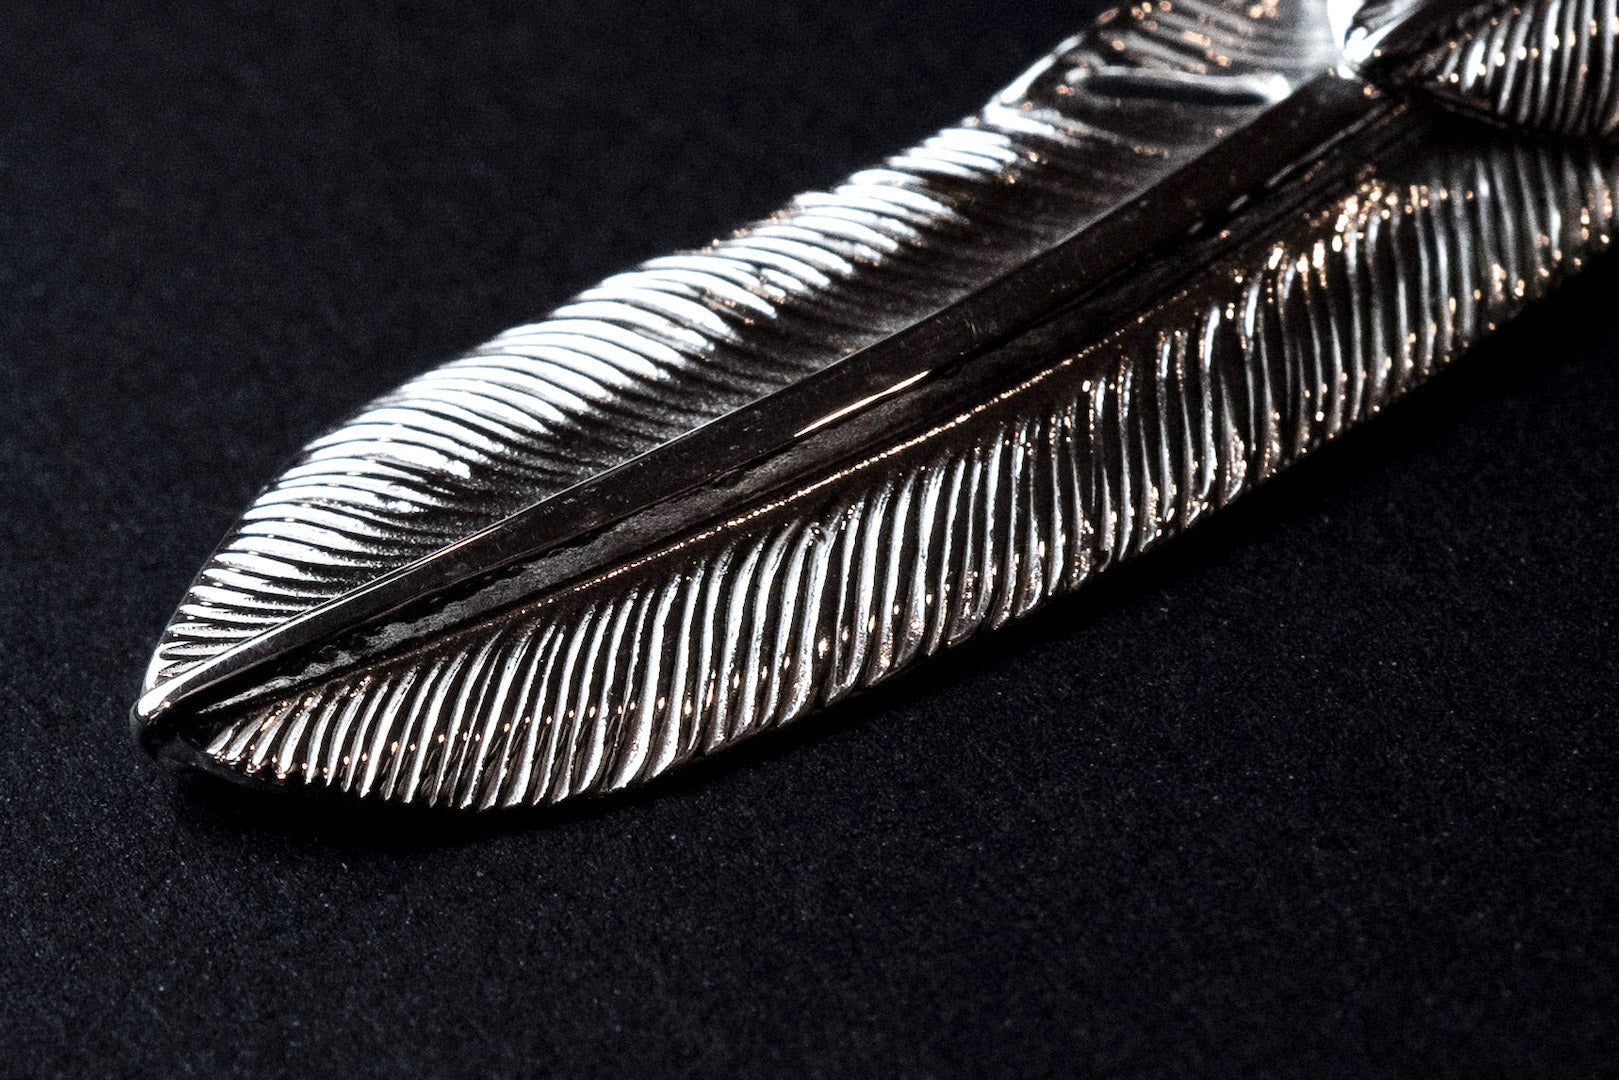 First Arrow's Silver Medium Feather With "Heart Feather" Pendant (P-515)